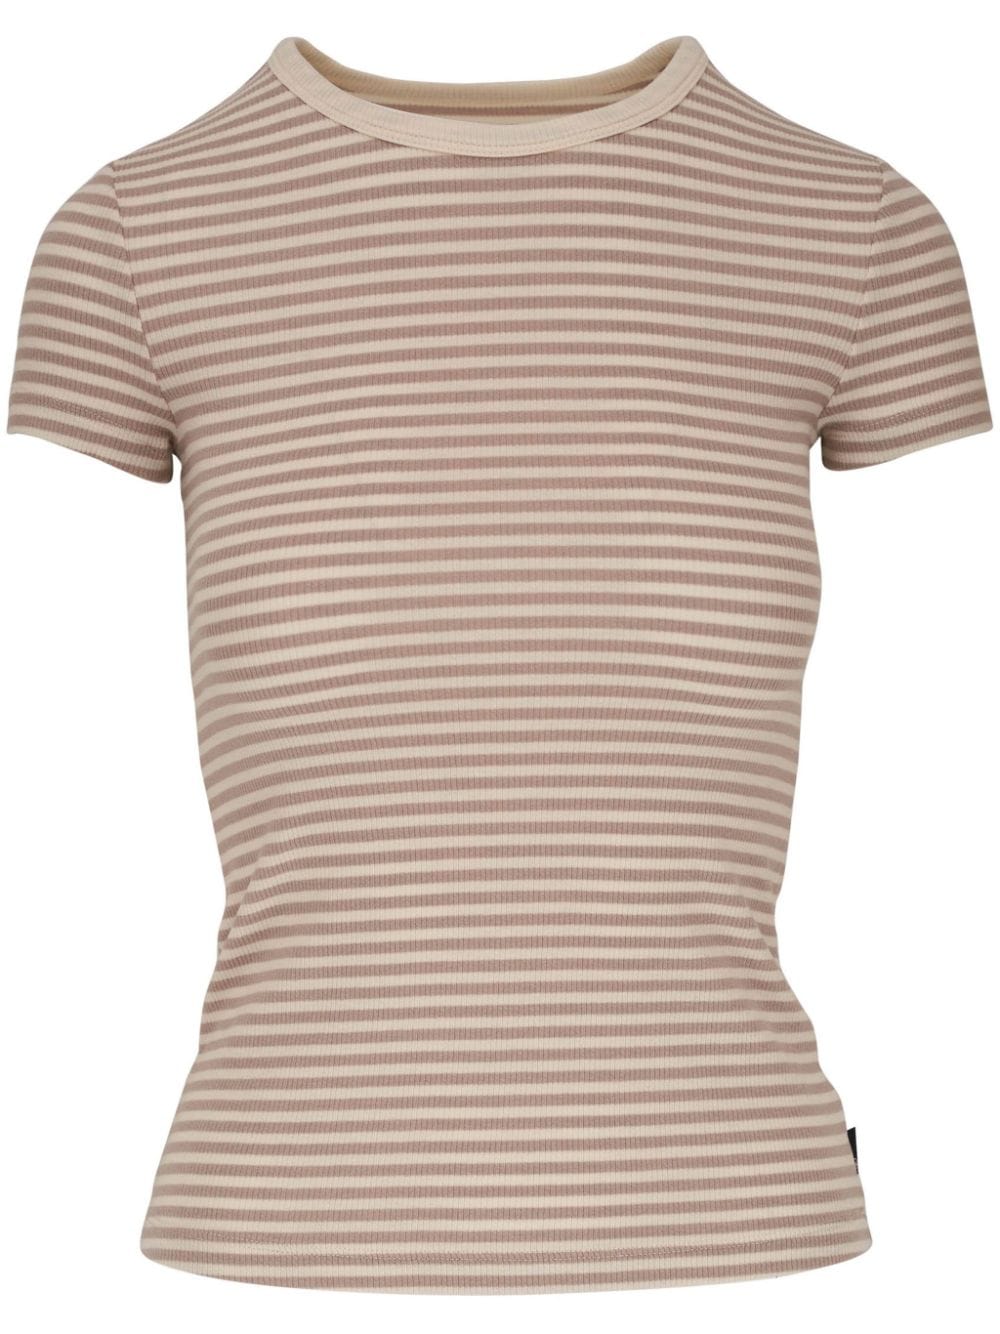 AG Jeans striped fine-ribbed T-shirt - Neutrals von AG Jeans